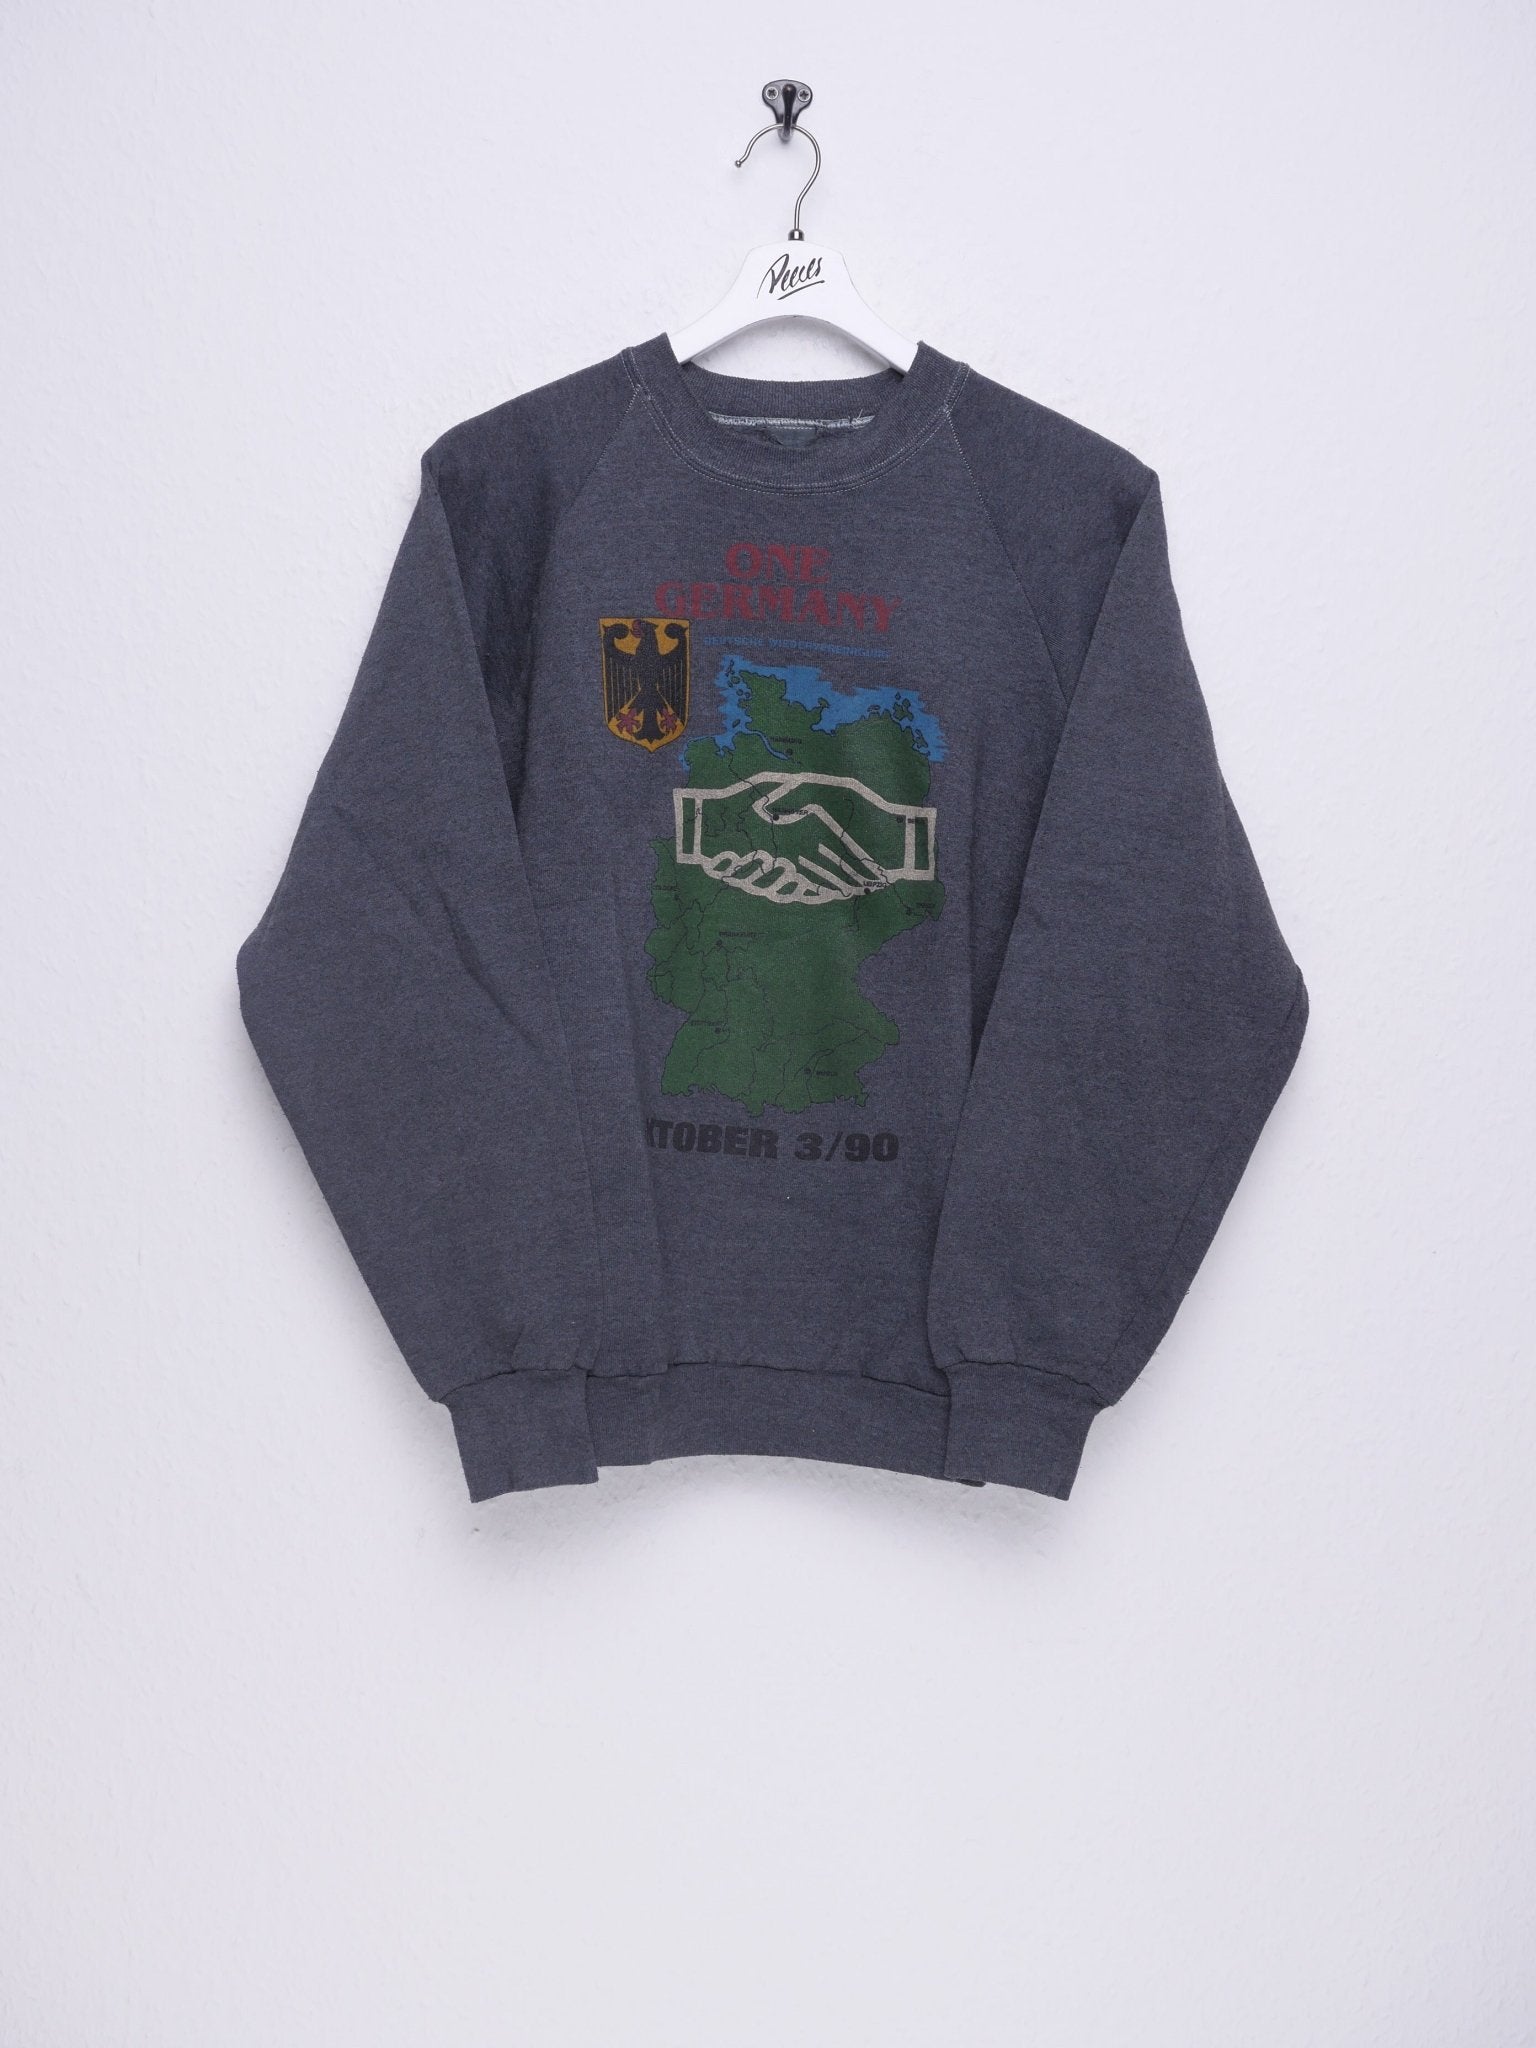 'One Germany' printed Graphic Vintage Sweater - Peeces